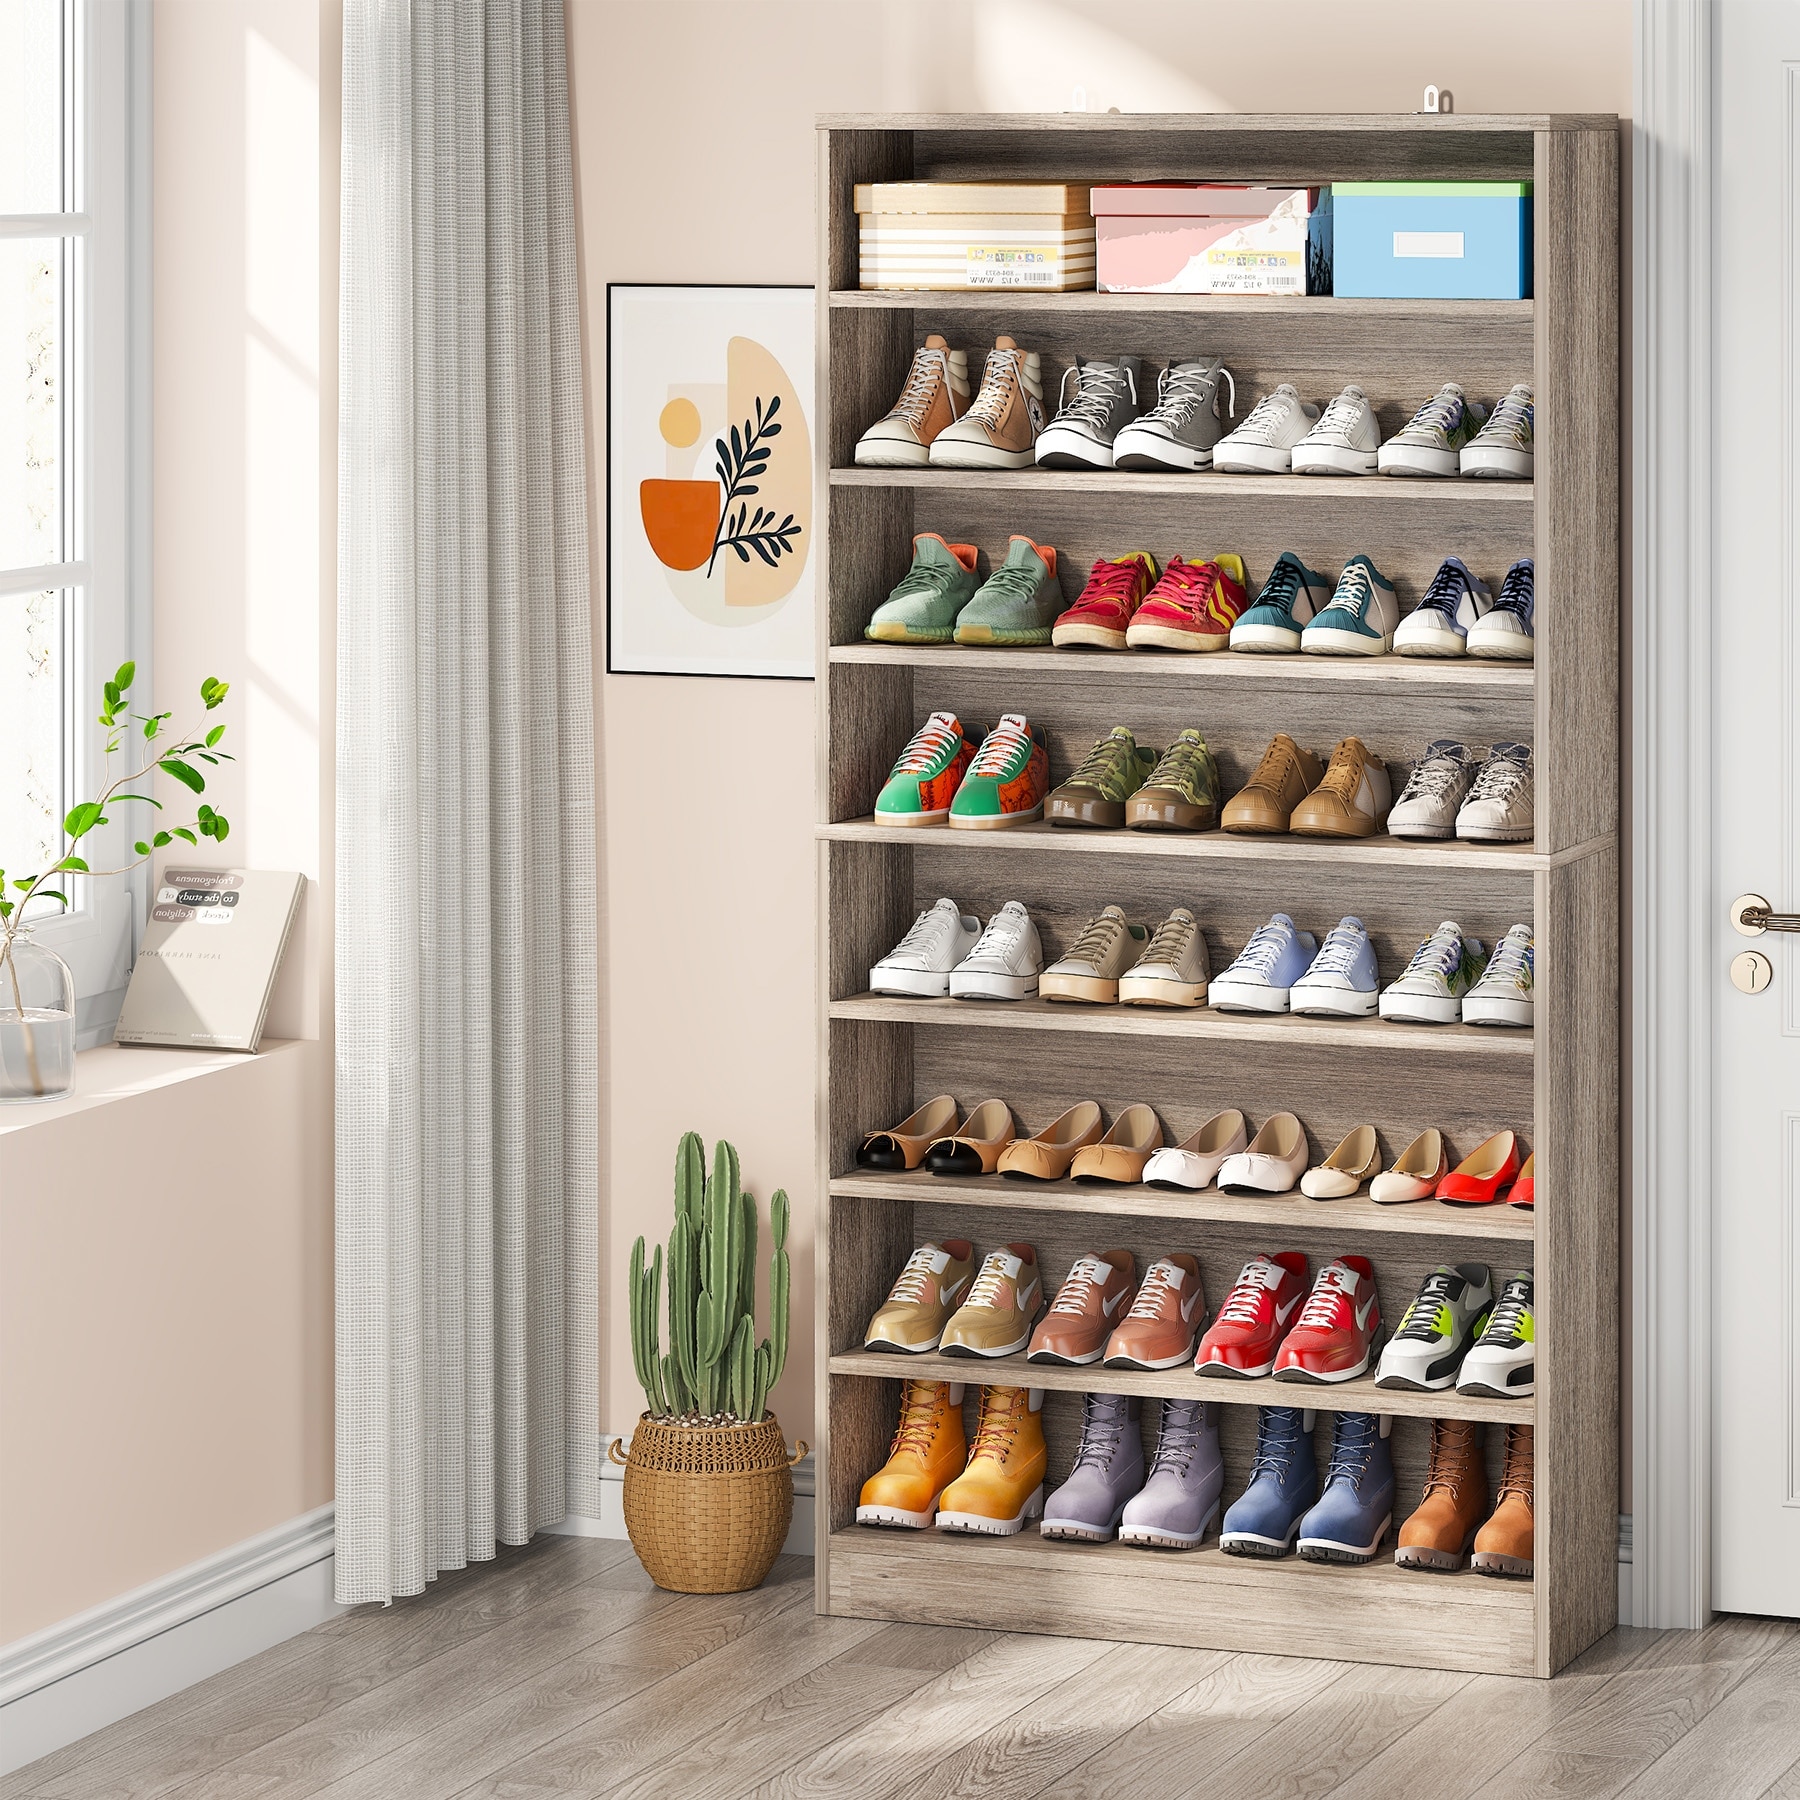 https://ak1.ostkcdn.com/images/products/is/images/direct/58b4506e9556107a6cd328d354abb9f7e35b513f/Shoe-Cabinet%2C9-Tiers-Tall-Shoes-Storage-Rack-Cabinets%2CWood-Shoe-Stand-with-Open-Shelf-for-Entryway.jpg